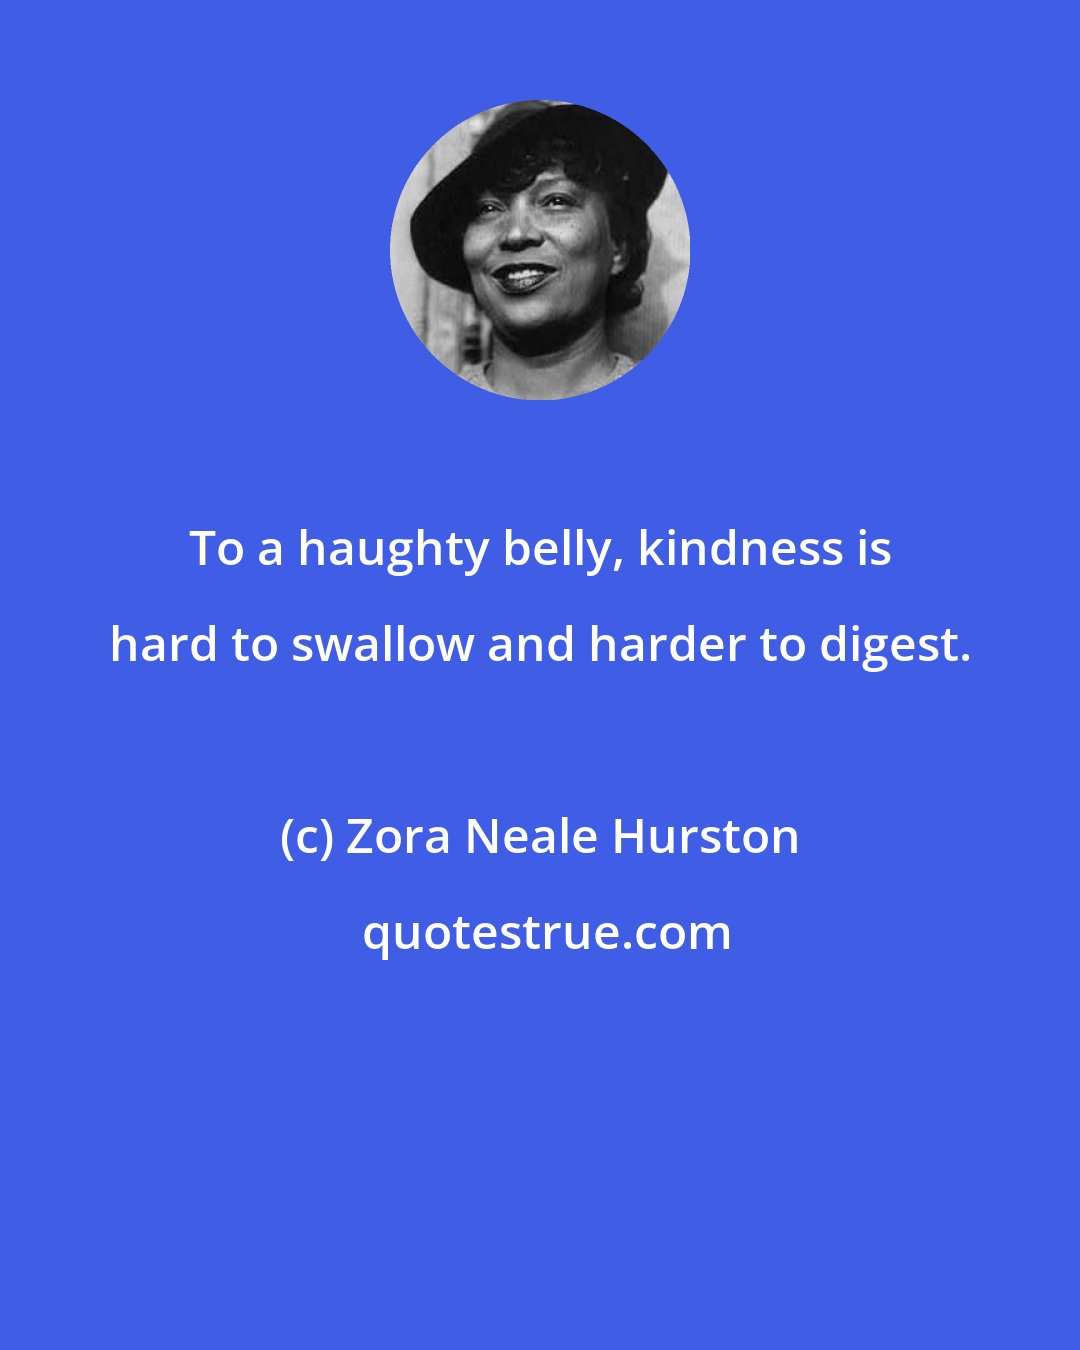 Zora Neale Hurston: To a haughty belly, kindness is hard to swallow and harder to digest.